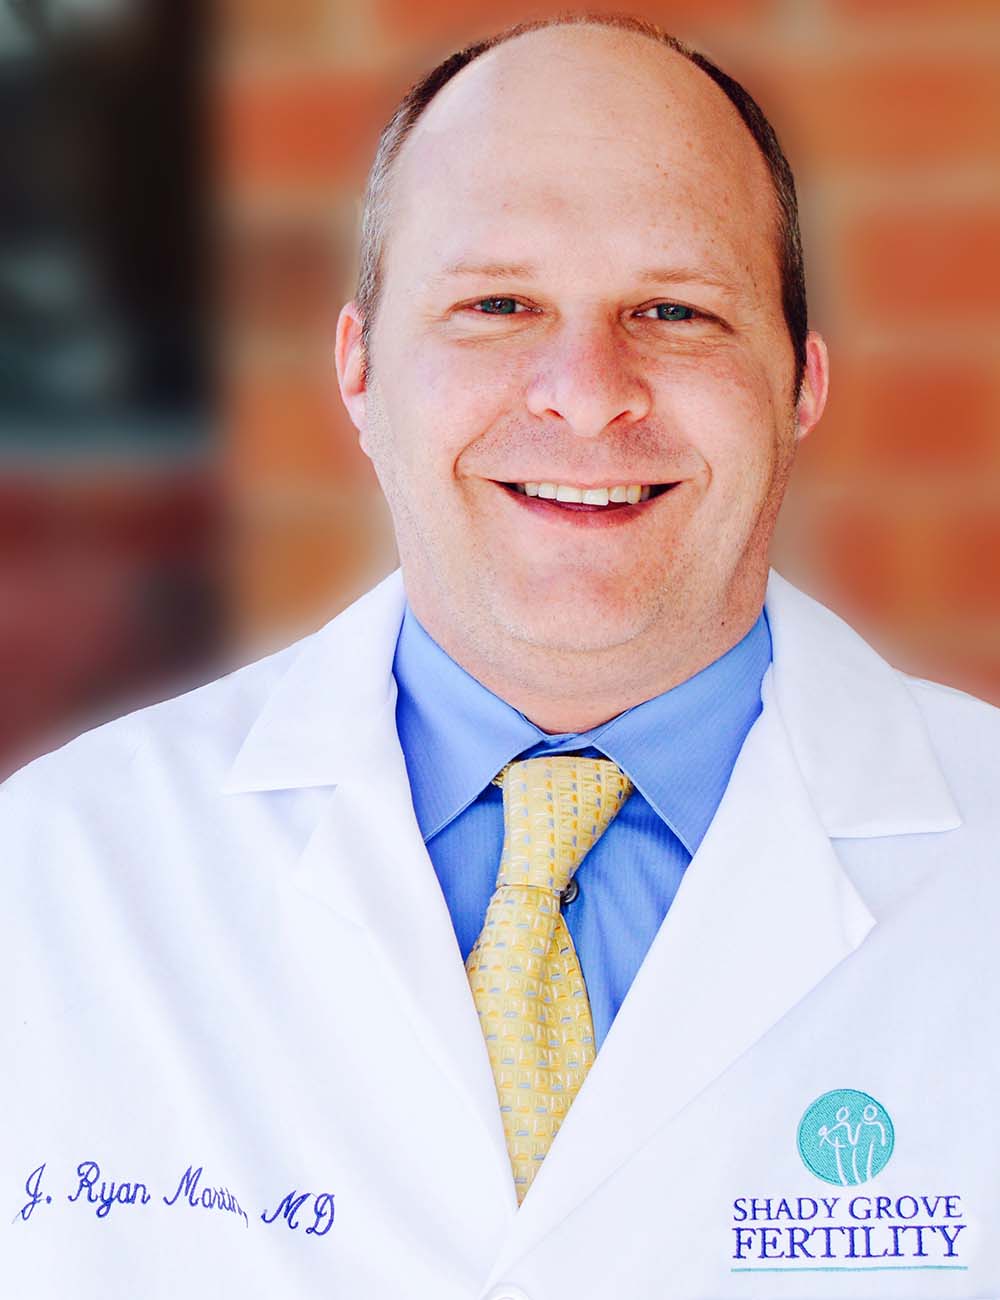 Shady Grove Fertility Welcomes Its Second New Physician To The Pennsylvania...